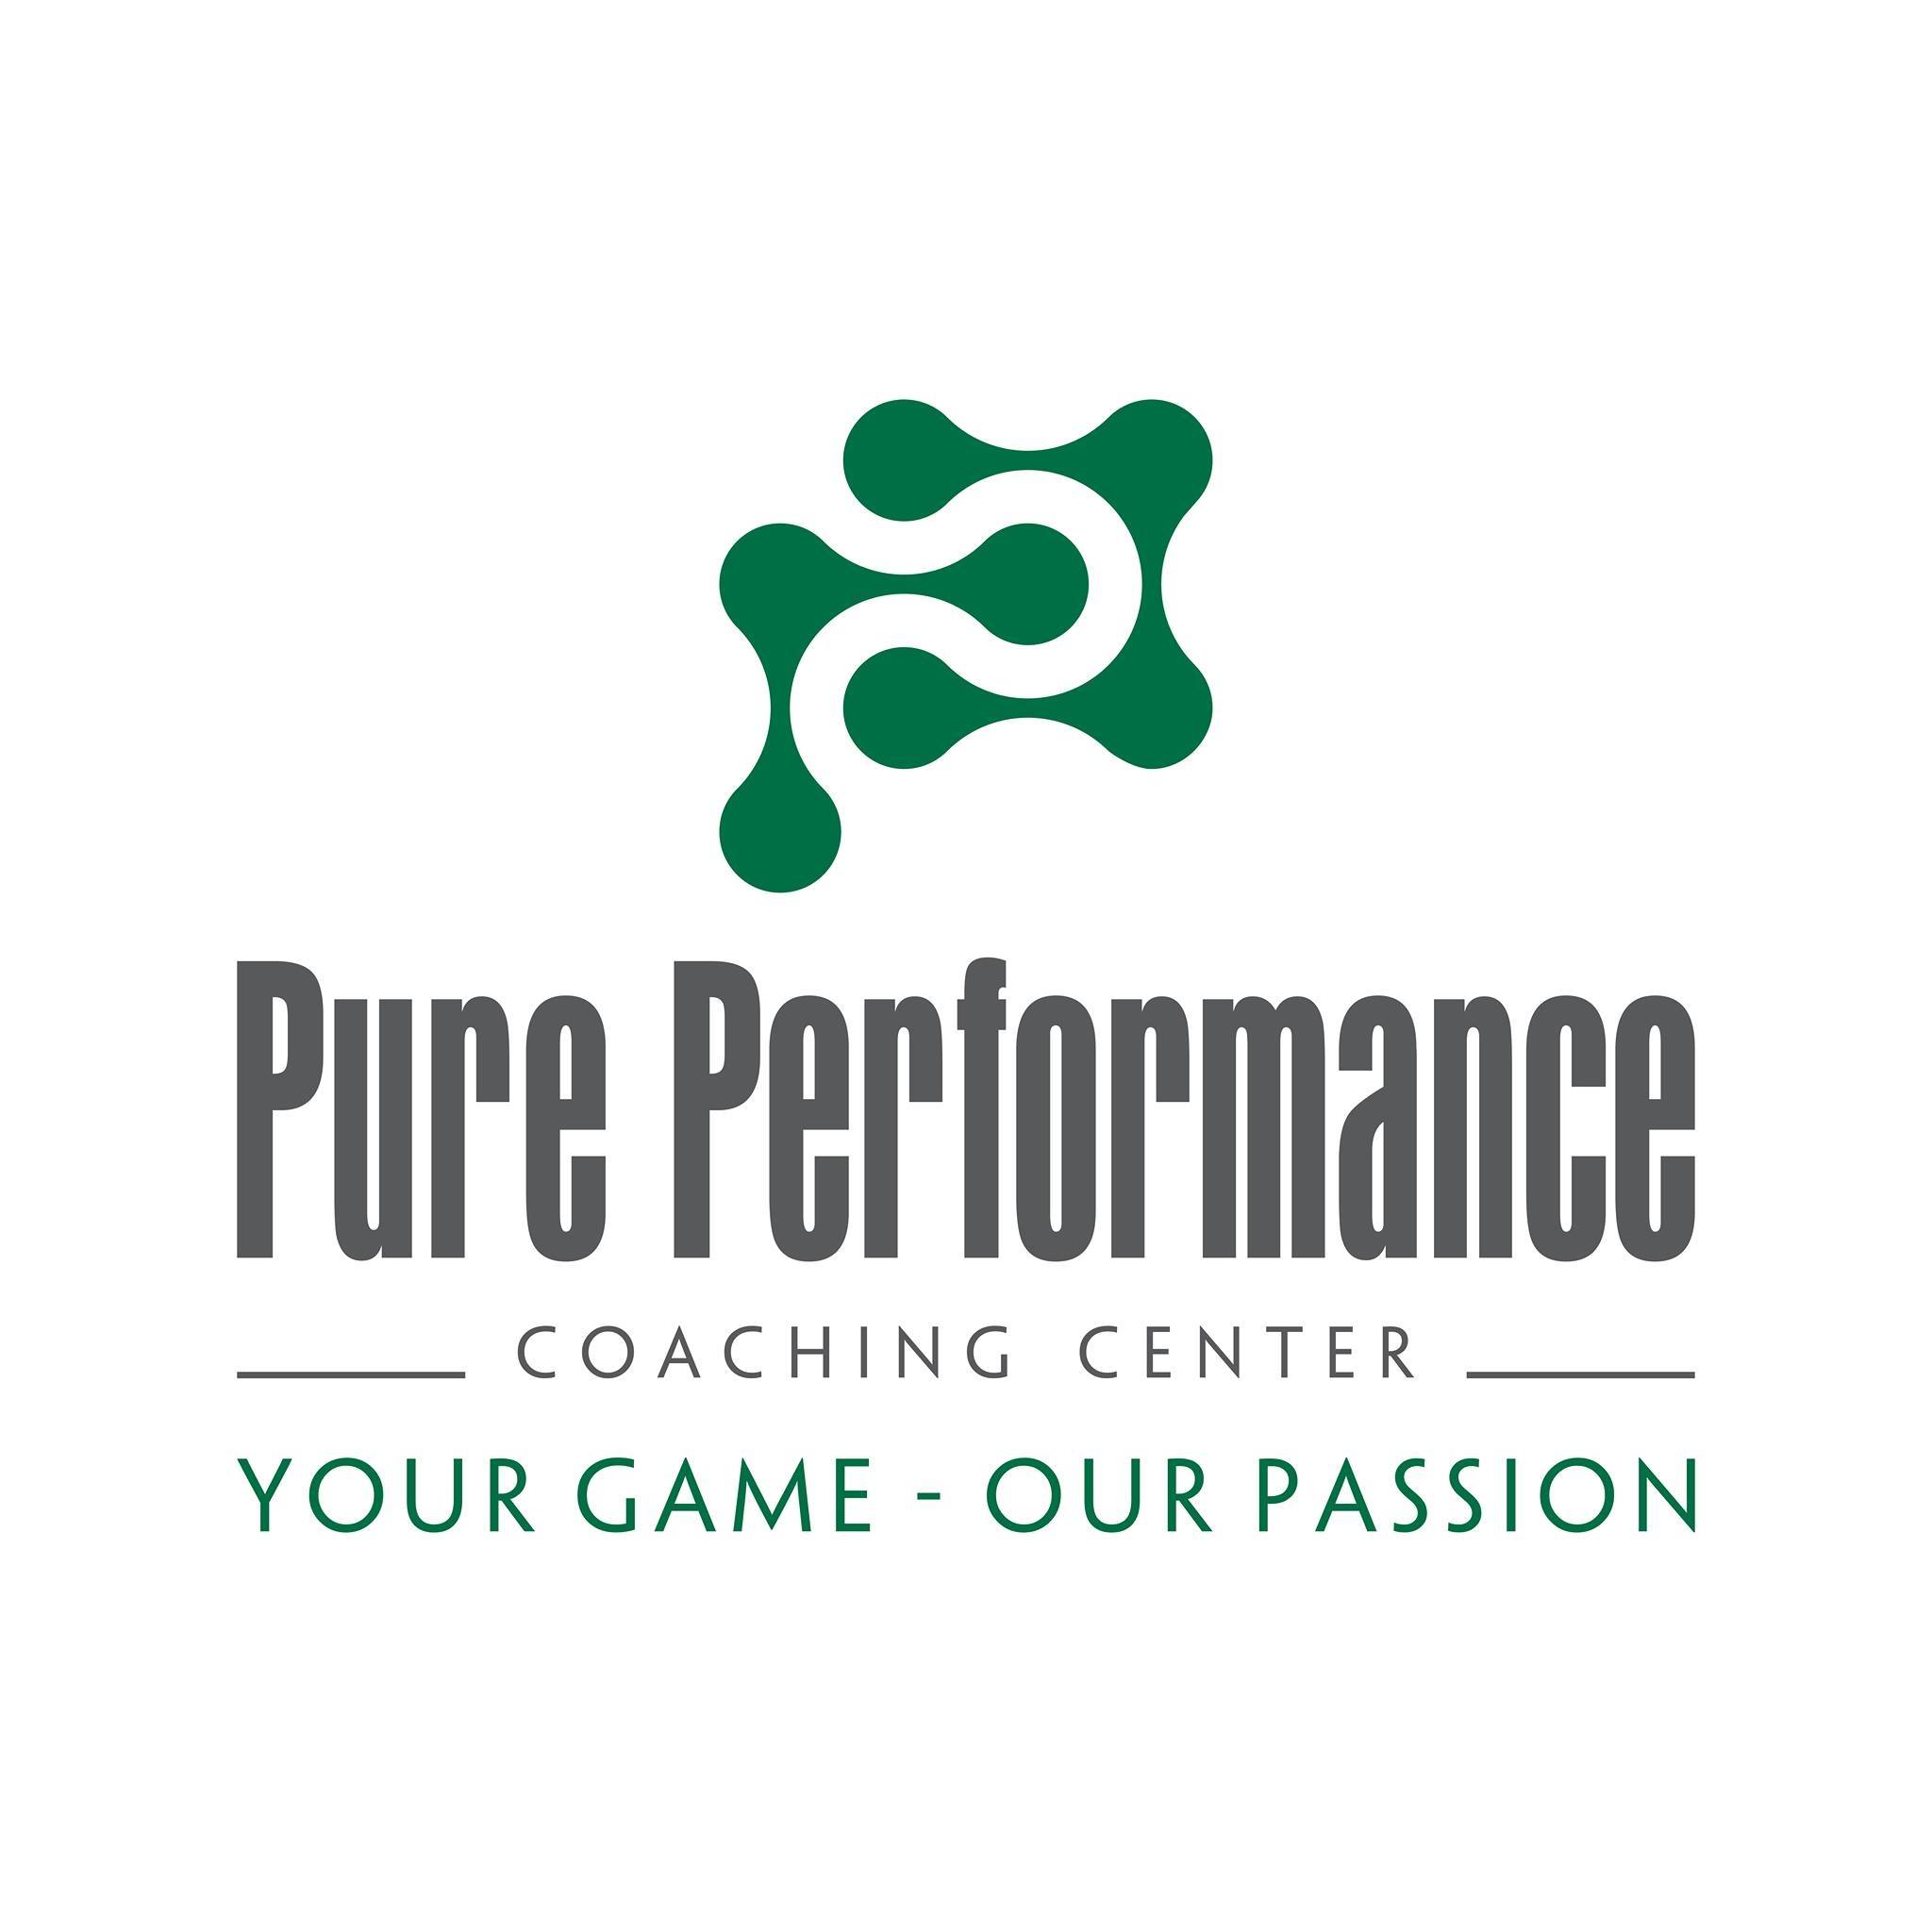 Pure Performance Coaching Center